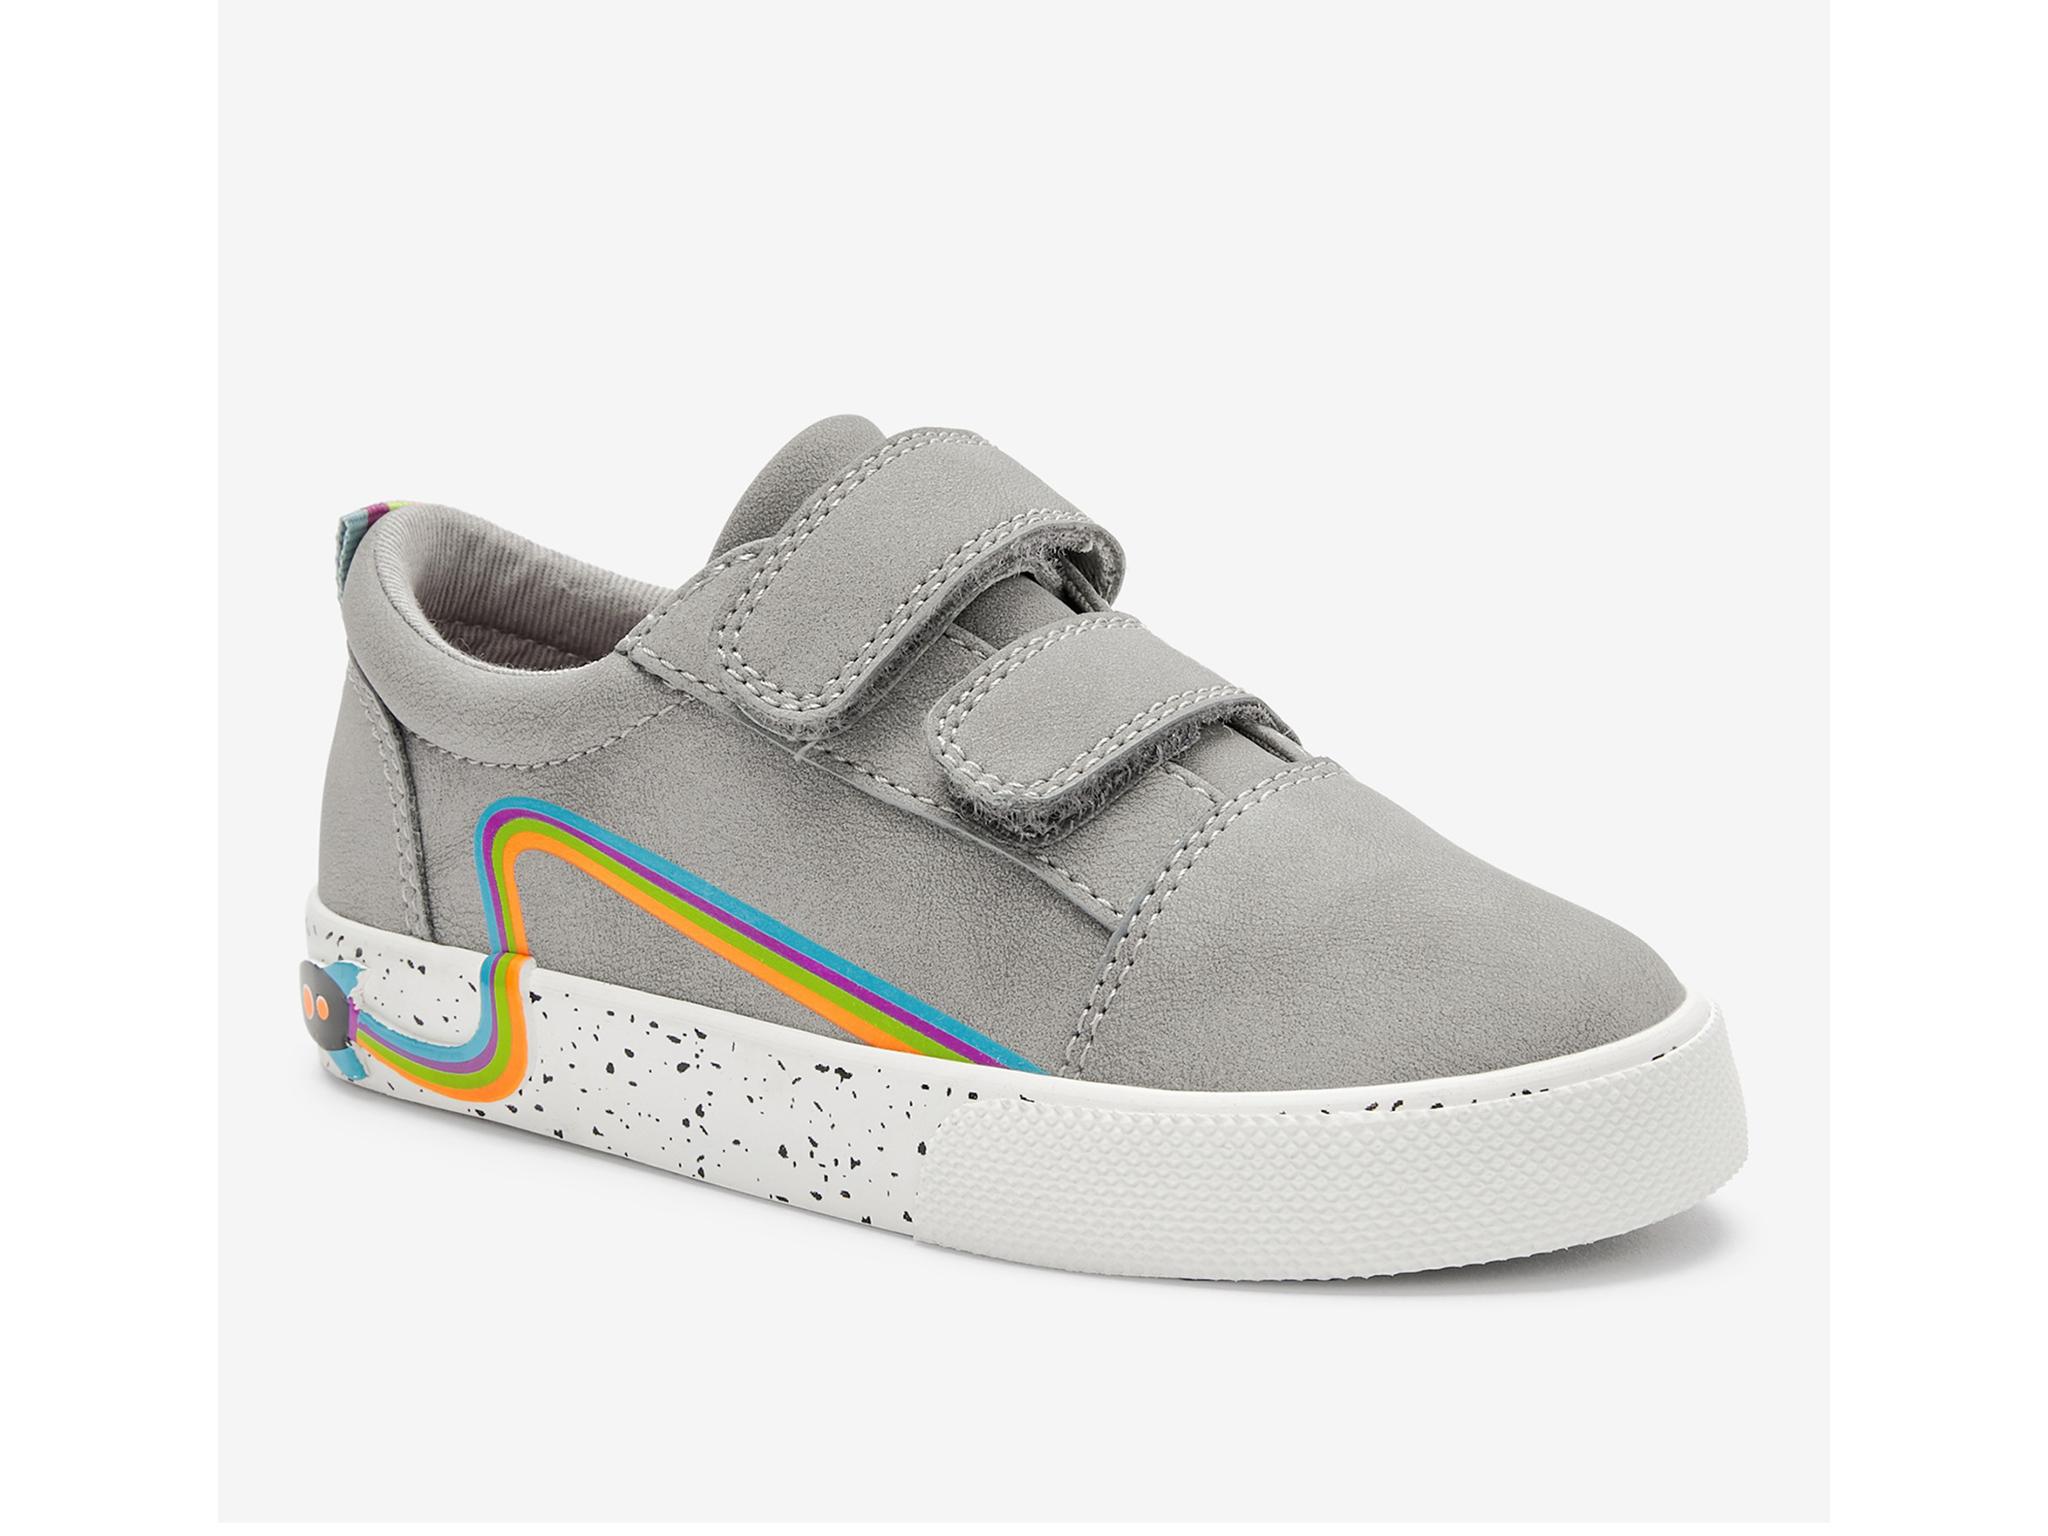 Best kids' trainers 2020: Velcro and 